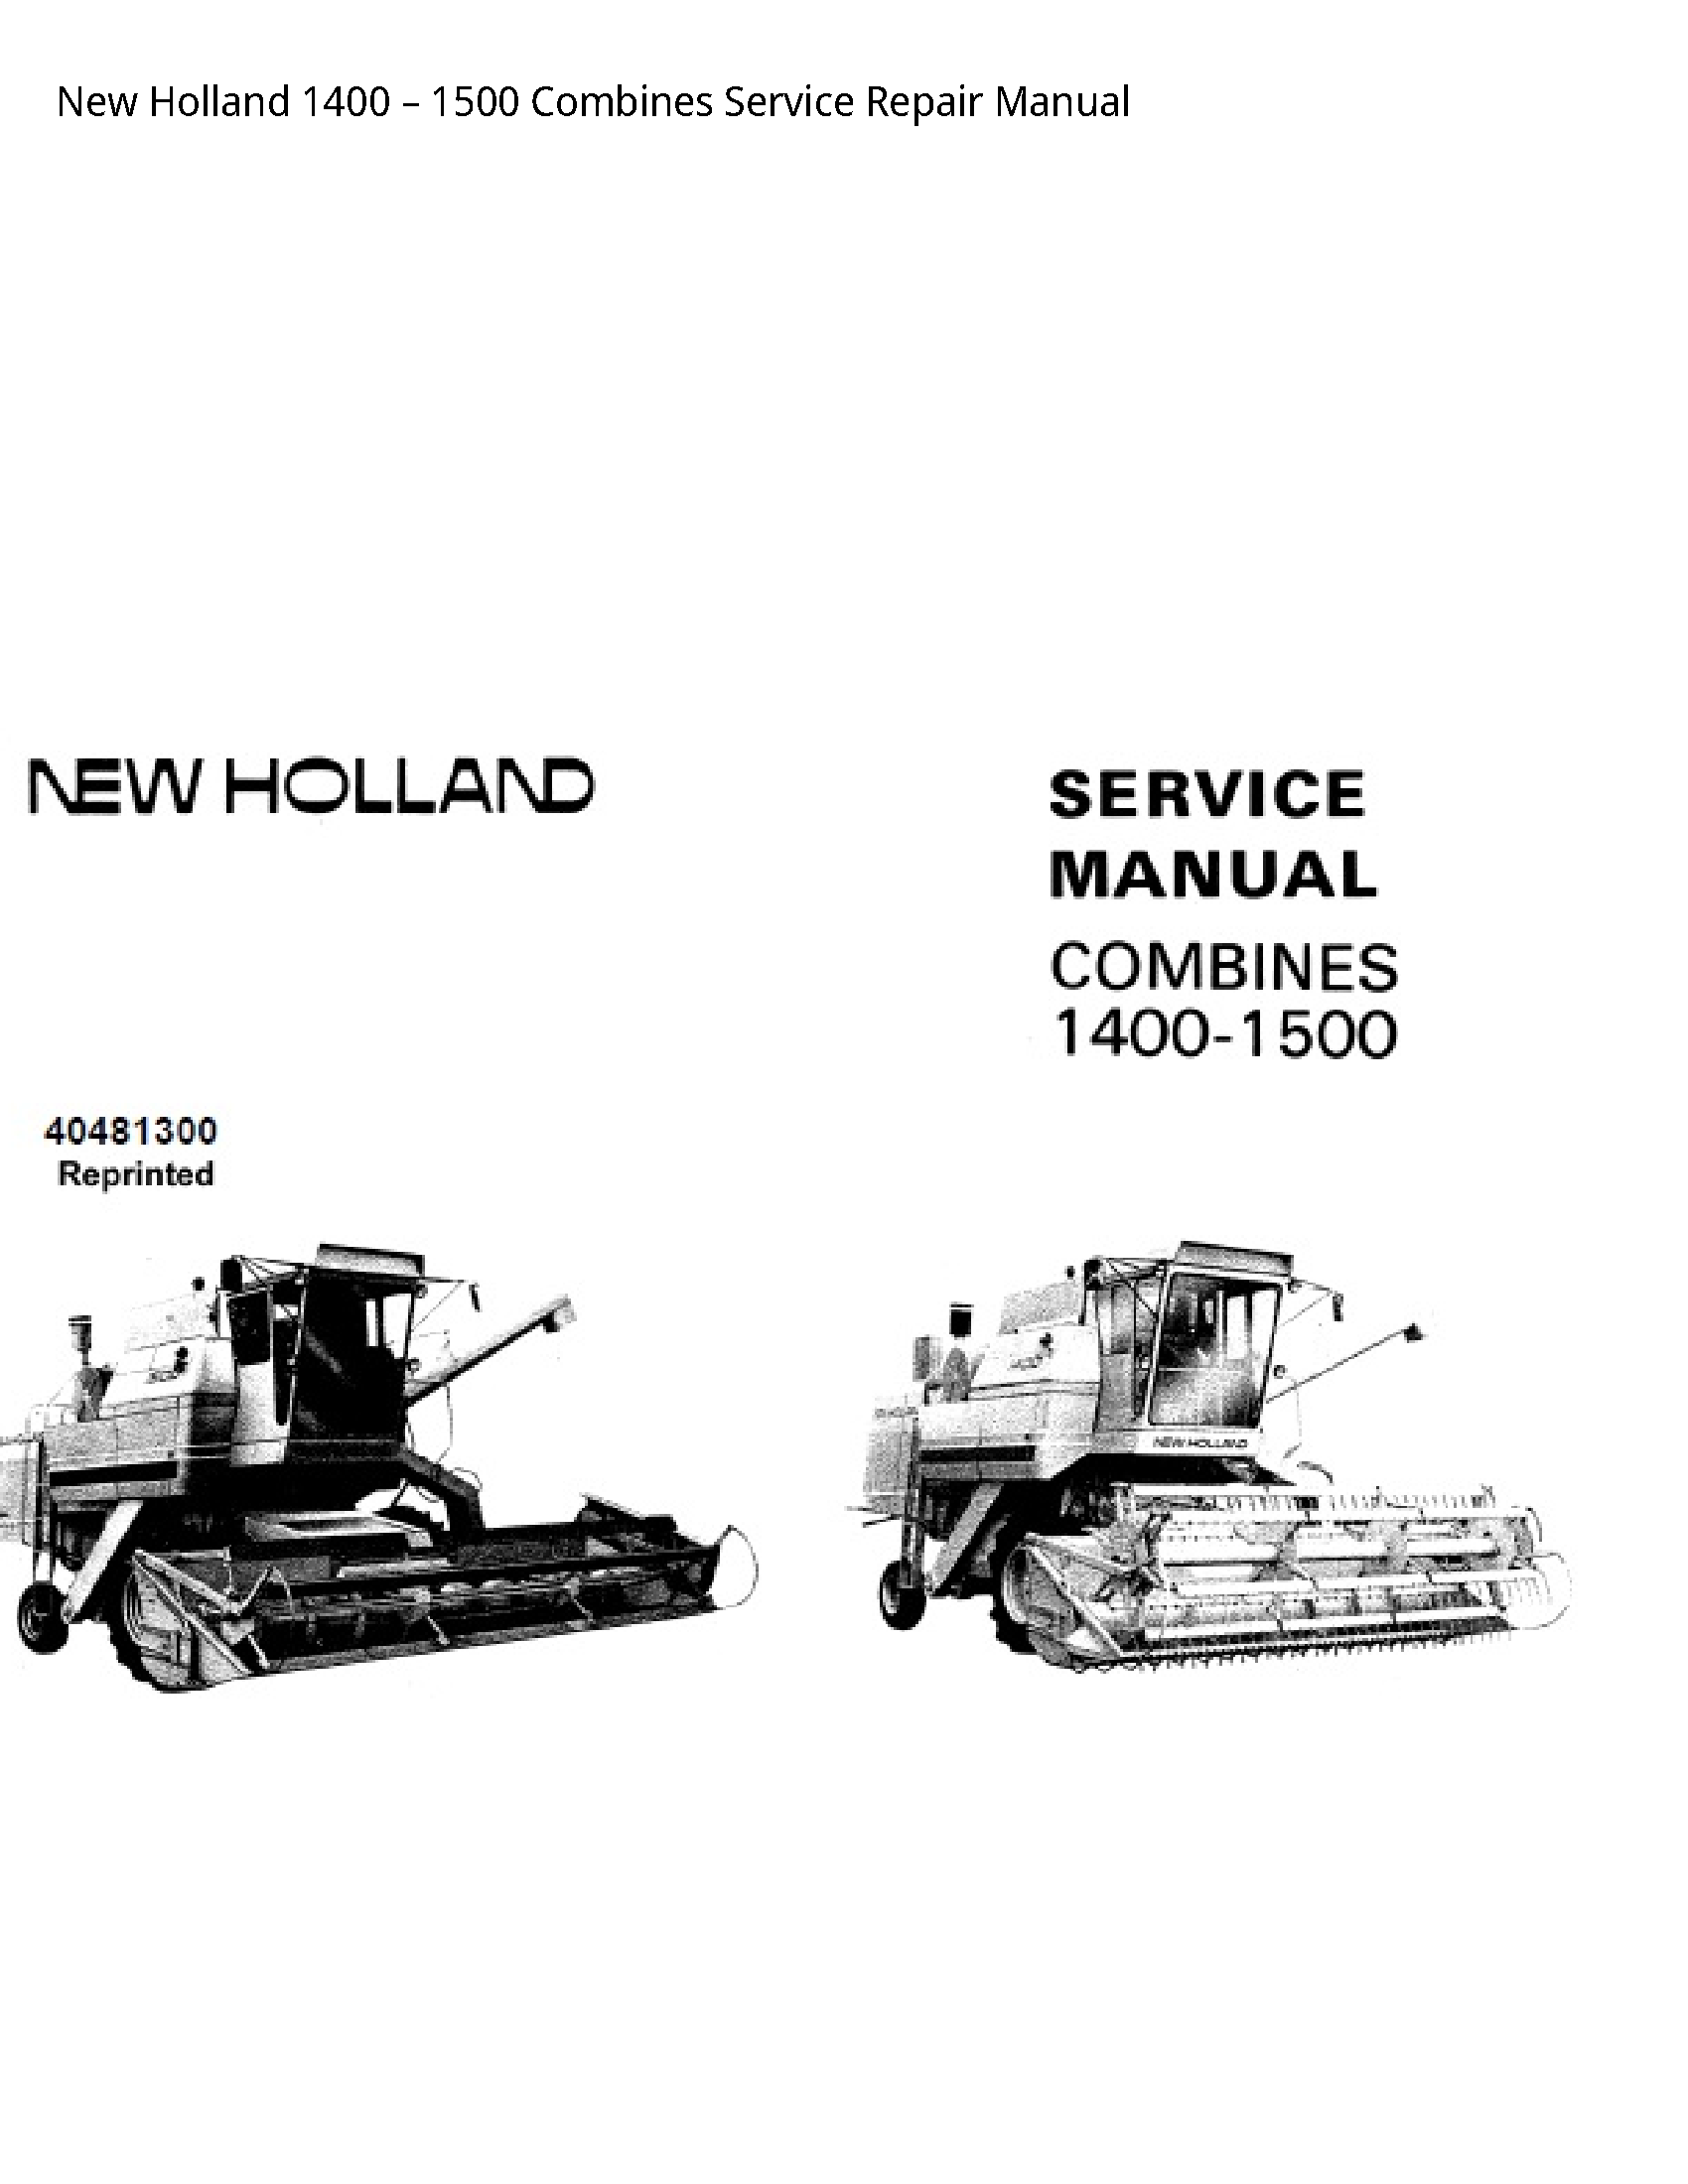 New Holland 1400 Combines manual